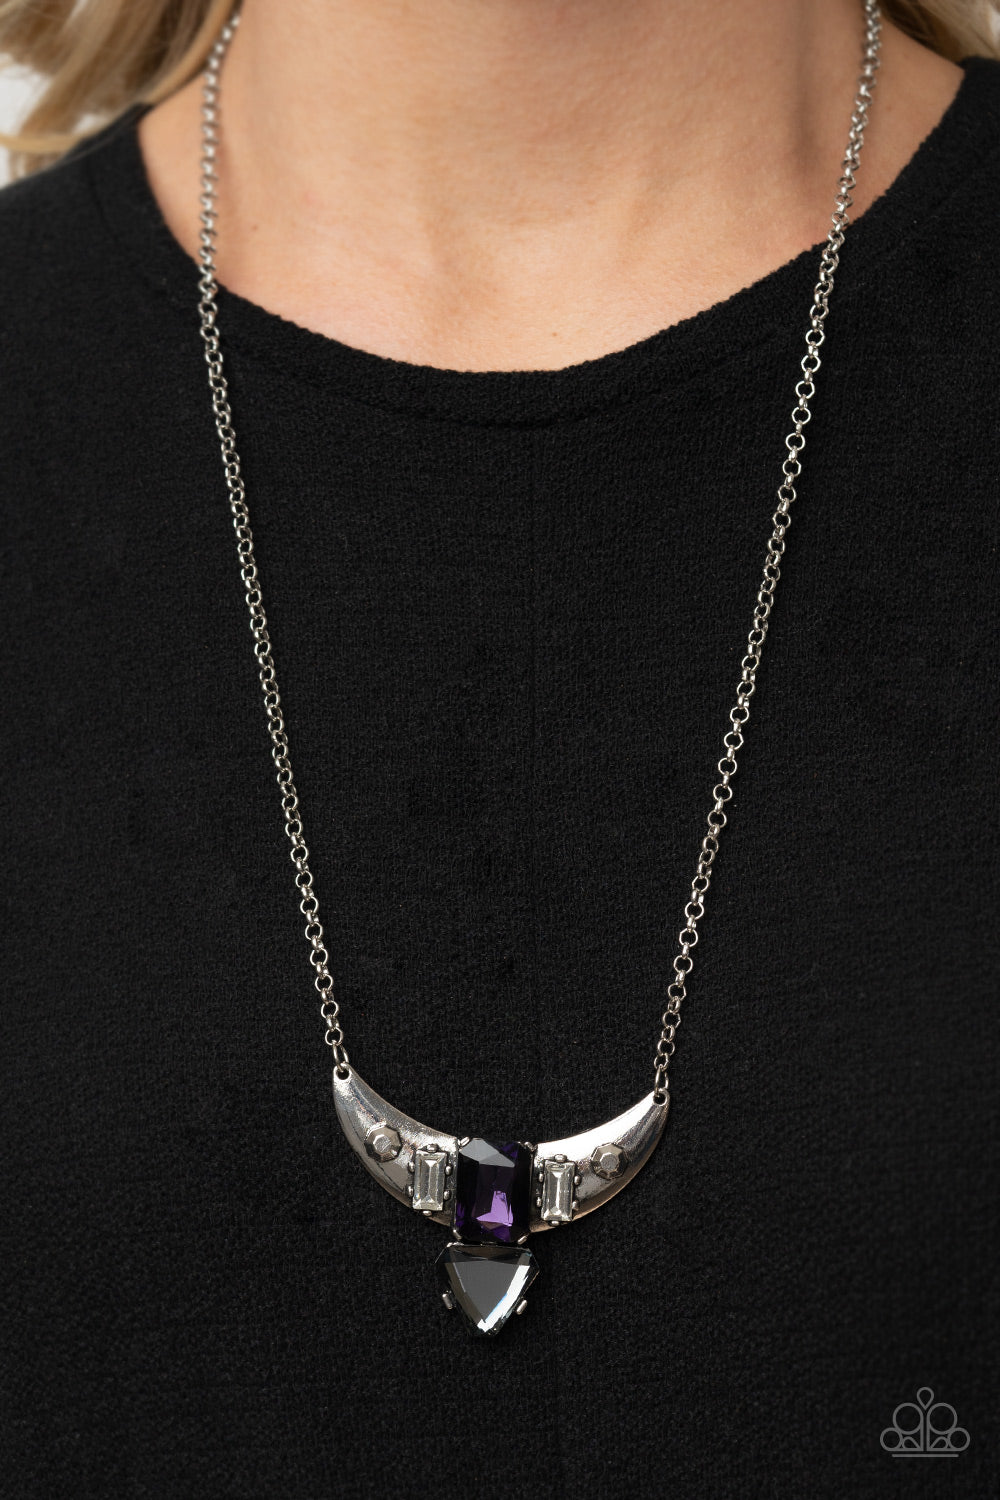 You the TALISMAN! Purple Necklace - Paparazzi Accessories  Pairs of faceted silver beads and glassy white emerald cut gems flank an oversized emerald cut purple gem atop an antiqued silver half moon frame. A smoky triangular cut gem adorns the bottom of the pendant, creating a twinkly talisman at the bottom of a classic silver chain. Features an adjustable clasp closure.  All Paparazzi Accessories are lead free and nickel free!  Sold as one individual necklace. Includes one pair of matching earrings.